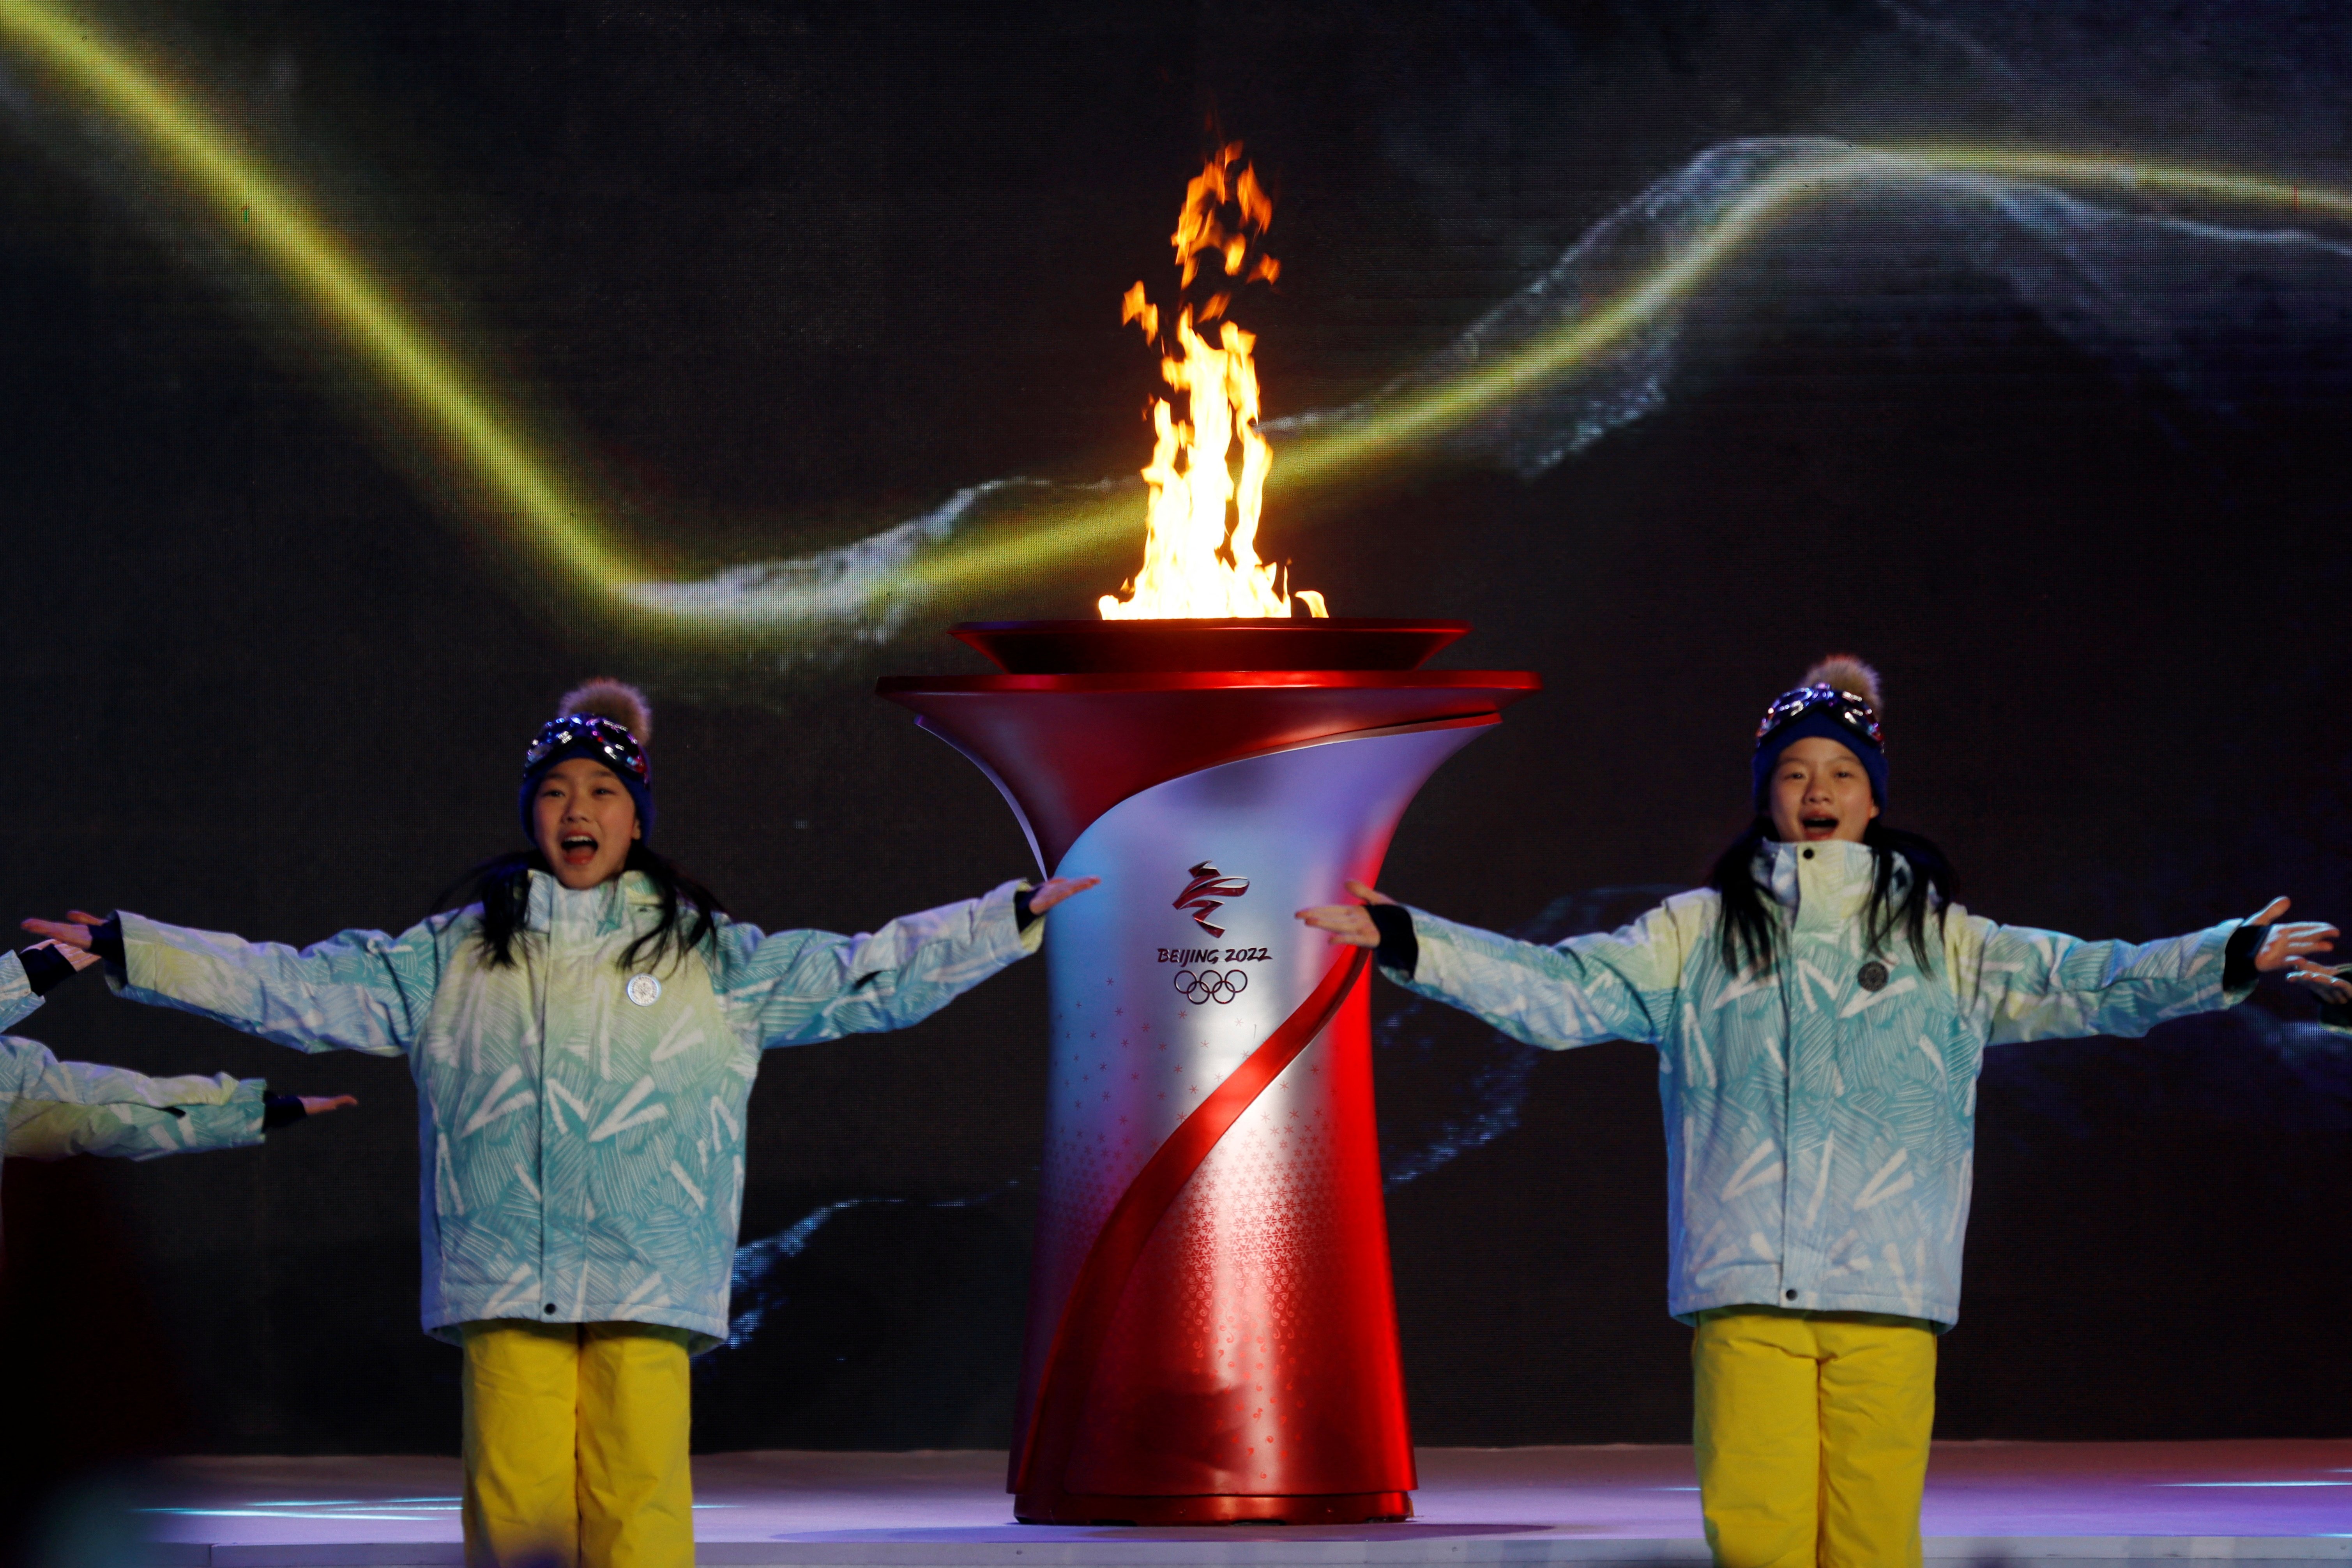 Actors perform next to a cauldron with the Olympic flame during a performance at the end of the torch relay session ahead of the Beijing 2022 Winter Olympics Feb. 2, 2022. (CNS photo/Florence Lo, Reuters)